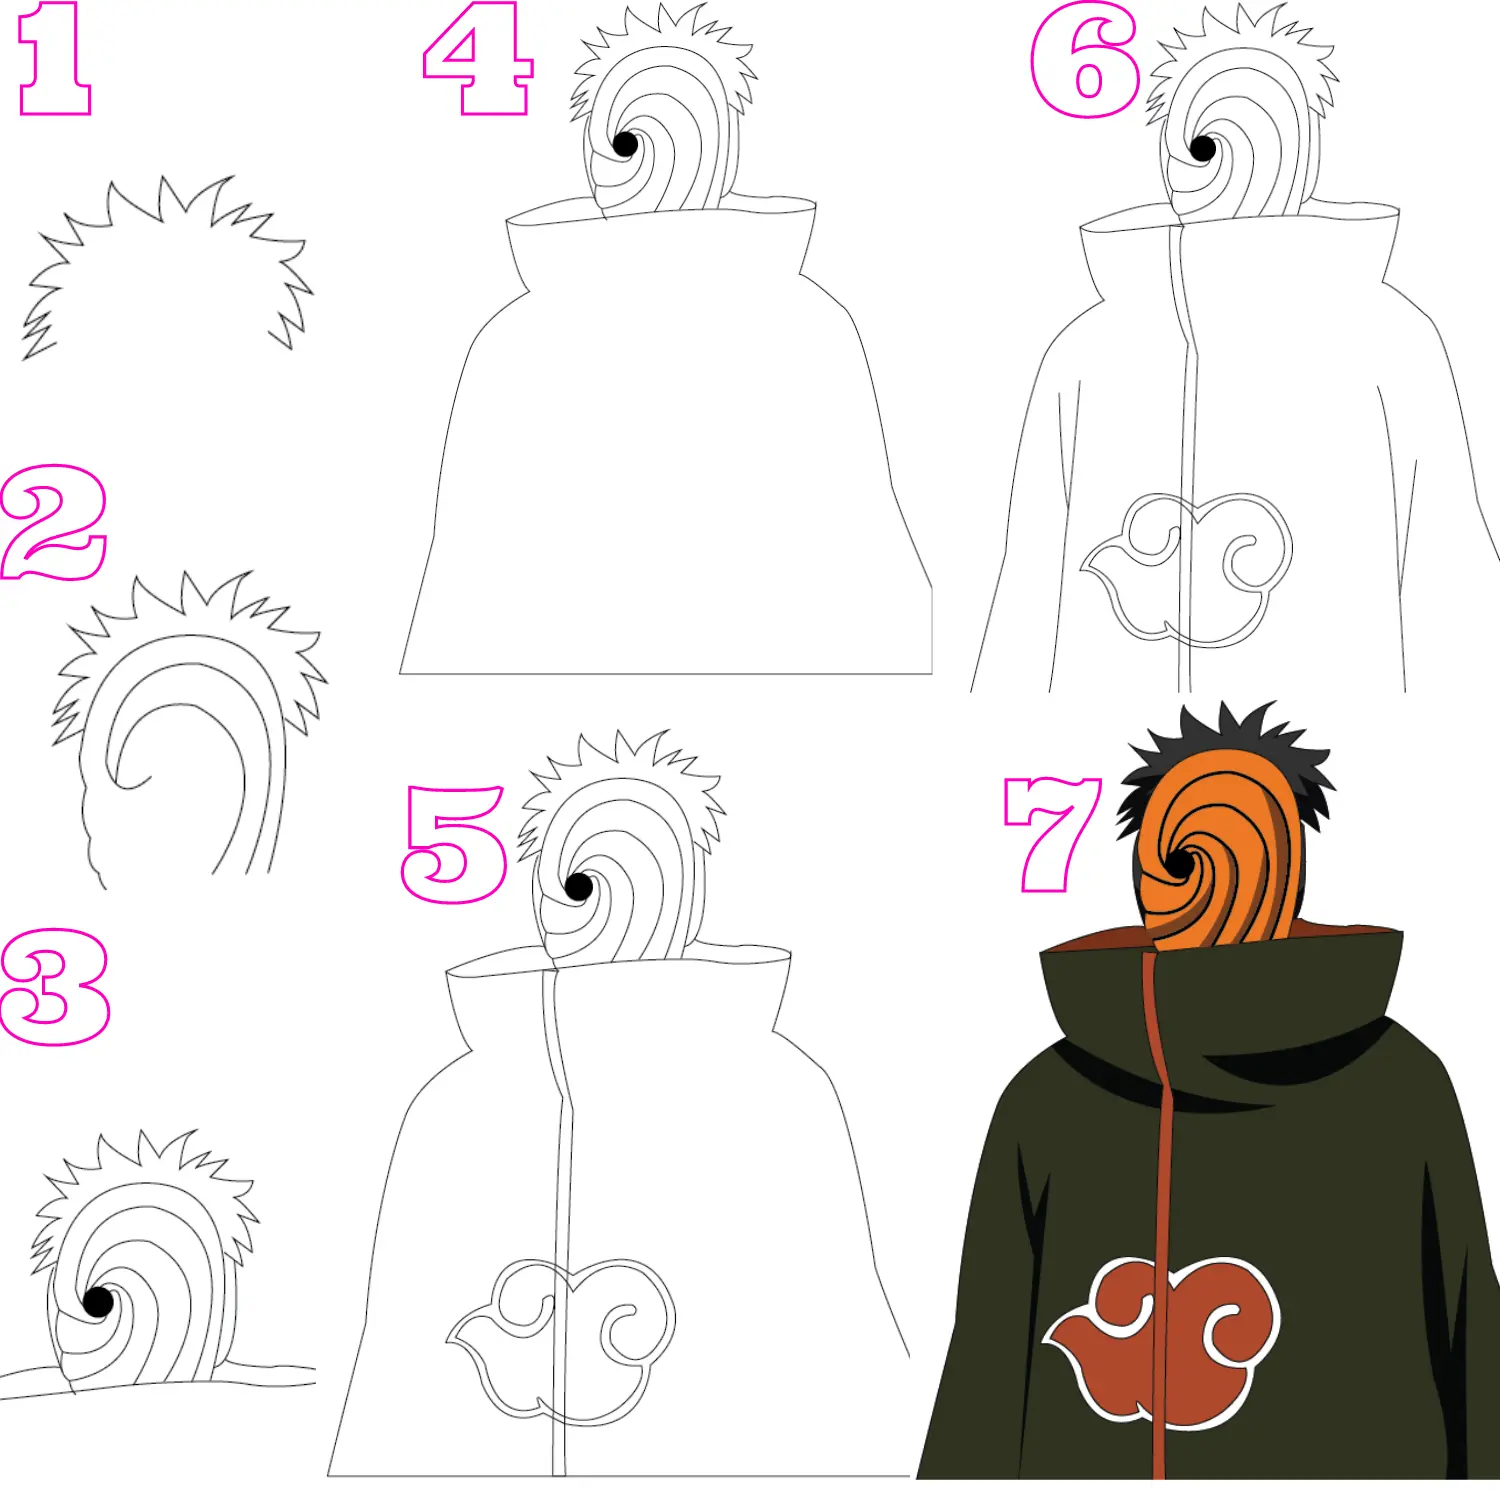 Tobi-Naruto-Drawing-Step-by-Step-Guide